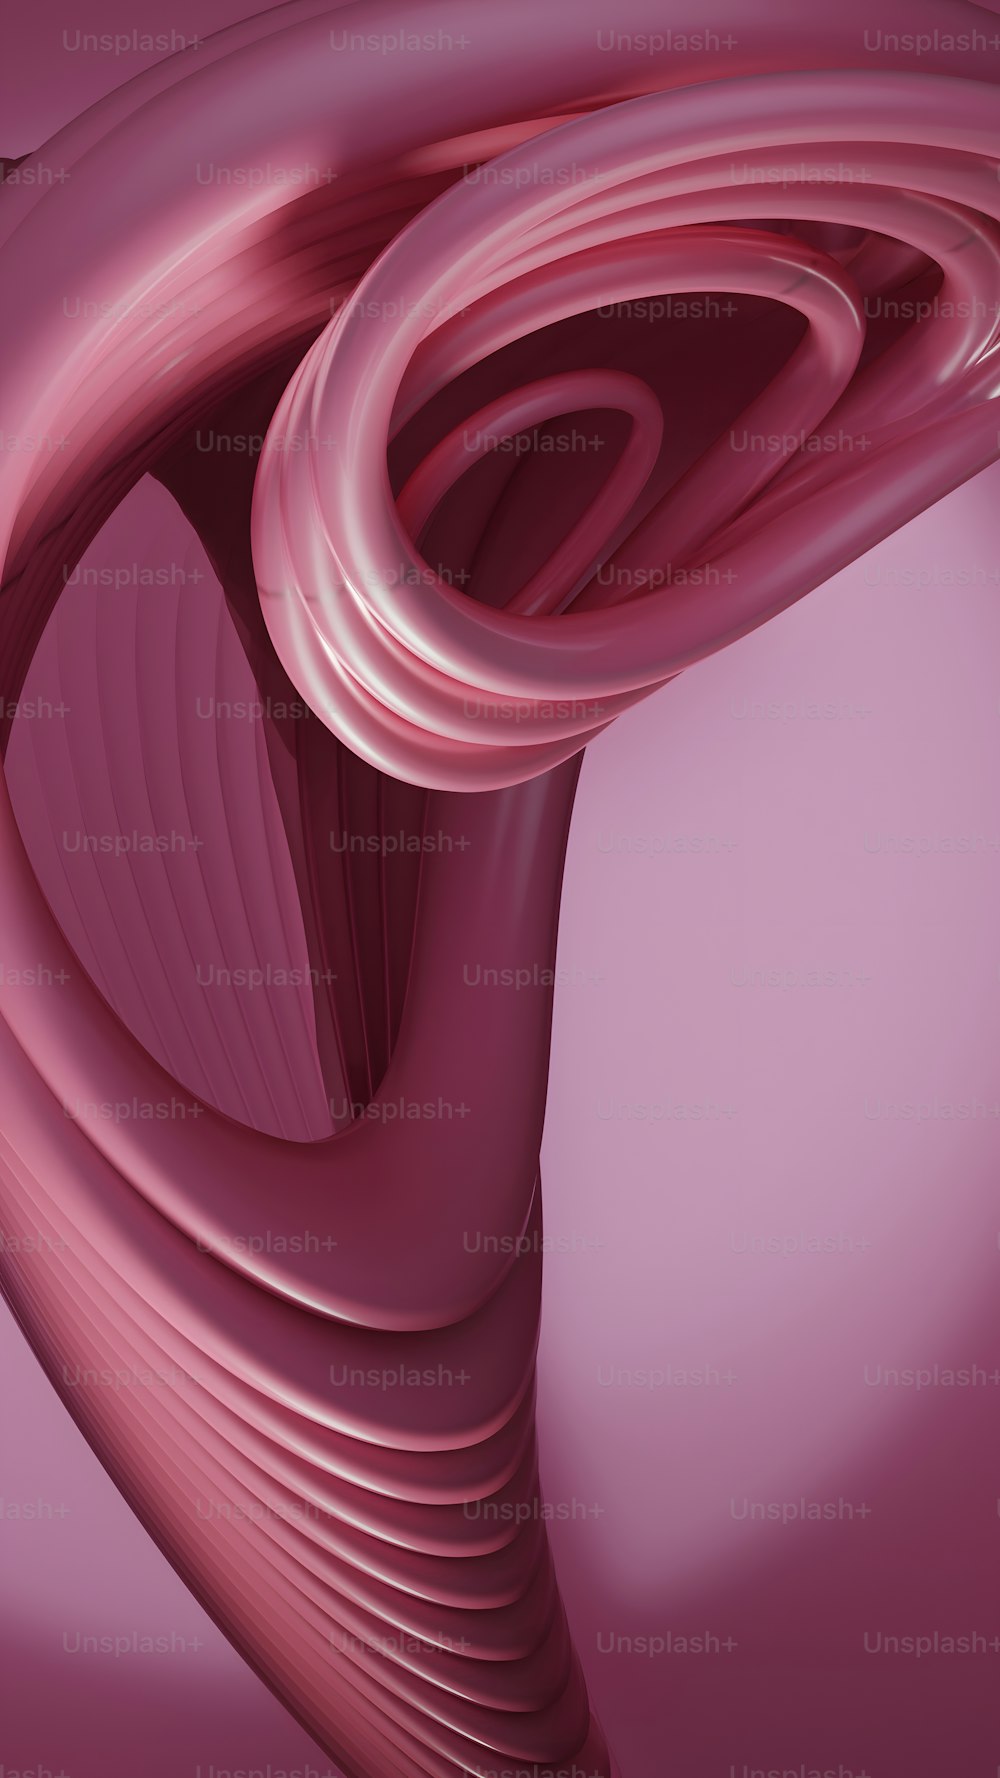 a pink background with a curved object in the middle